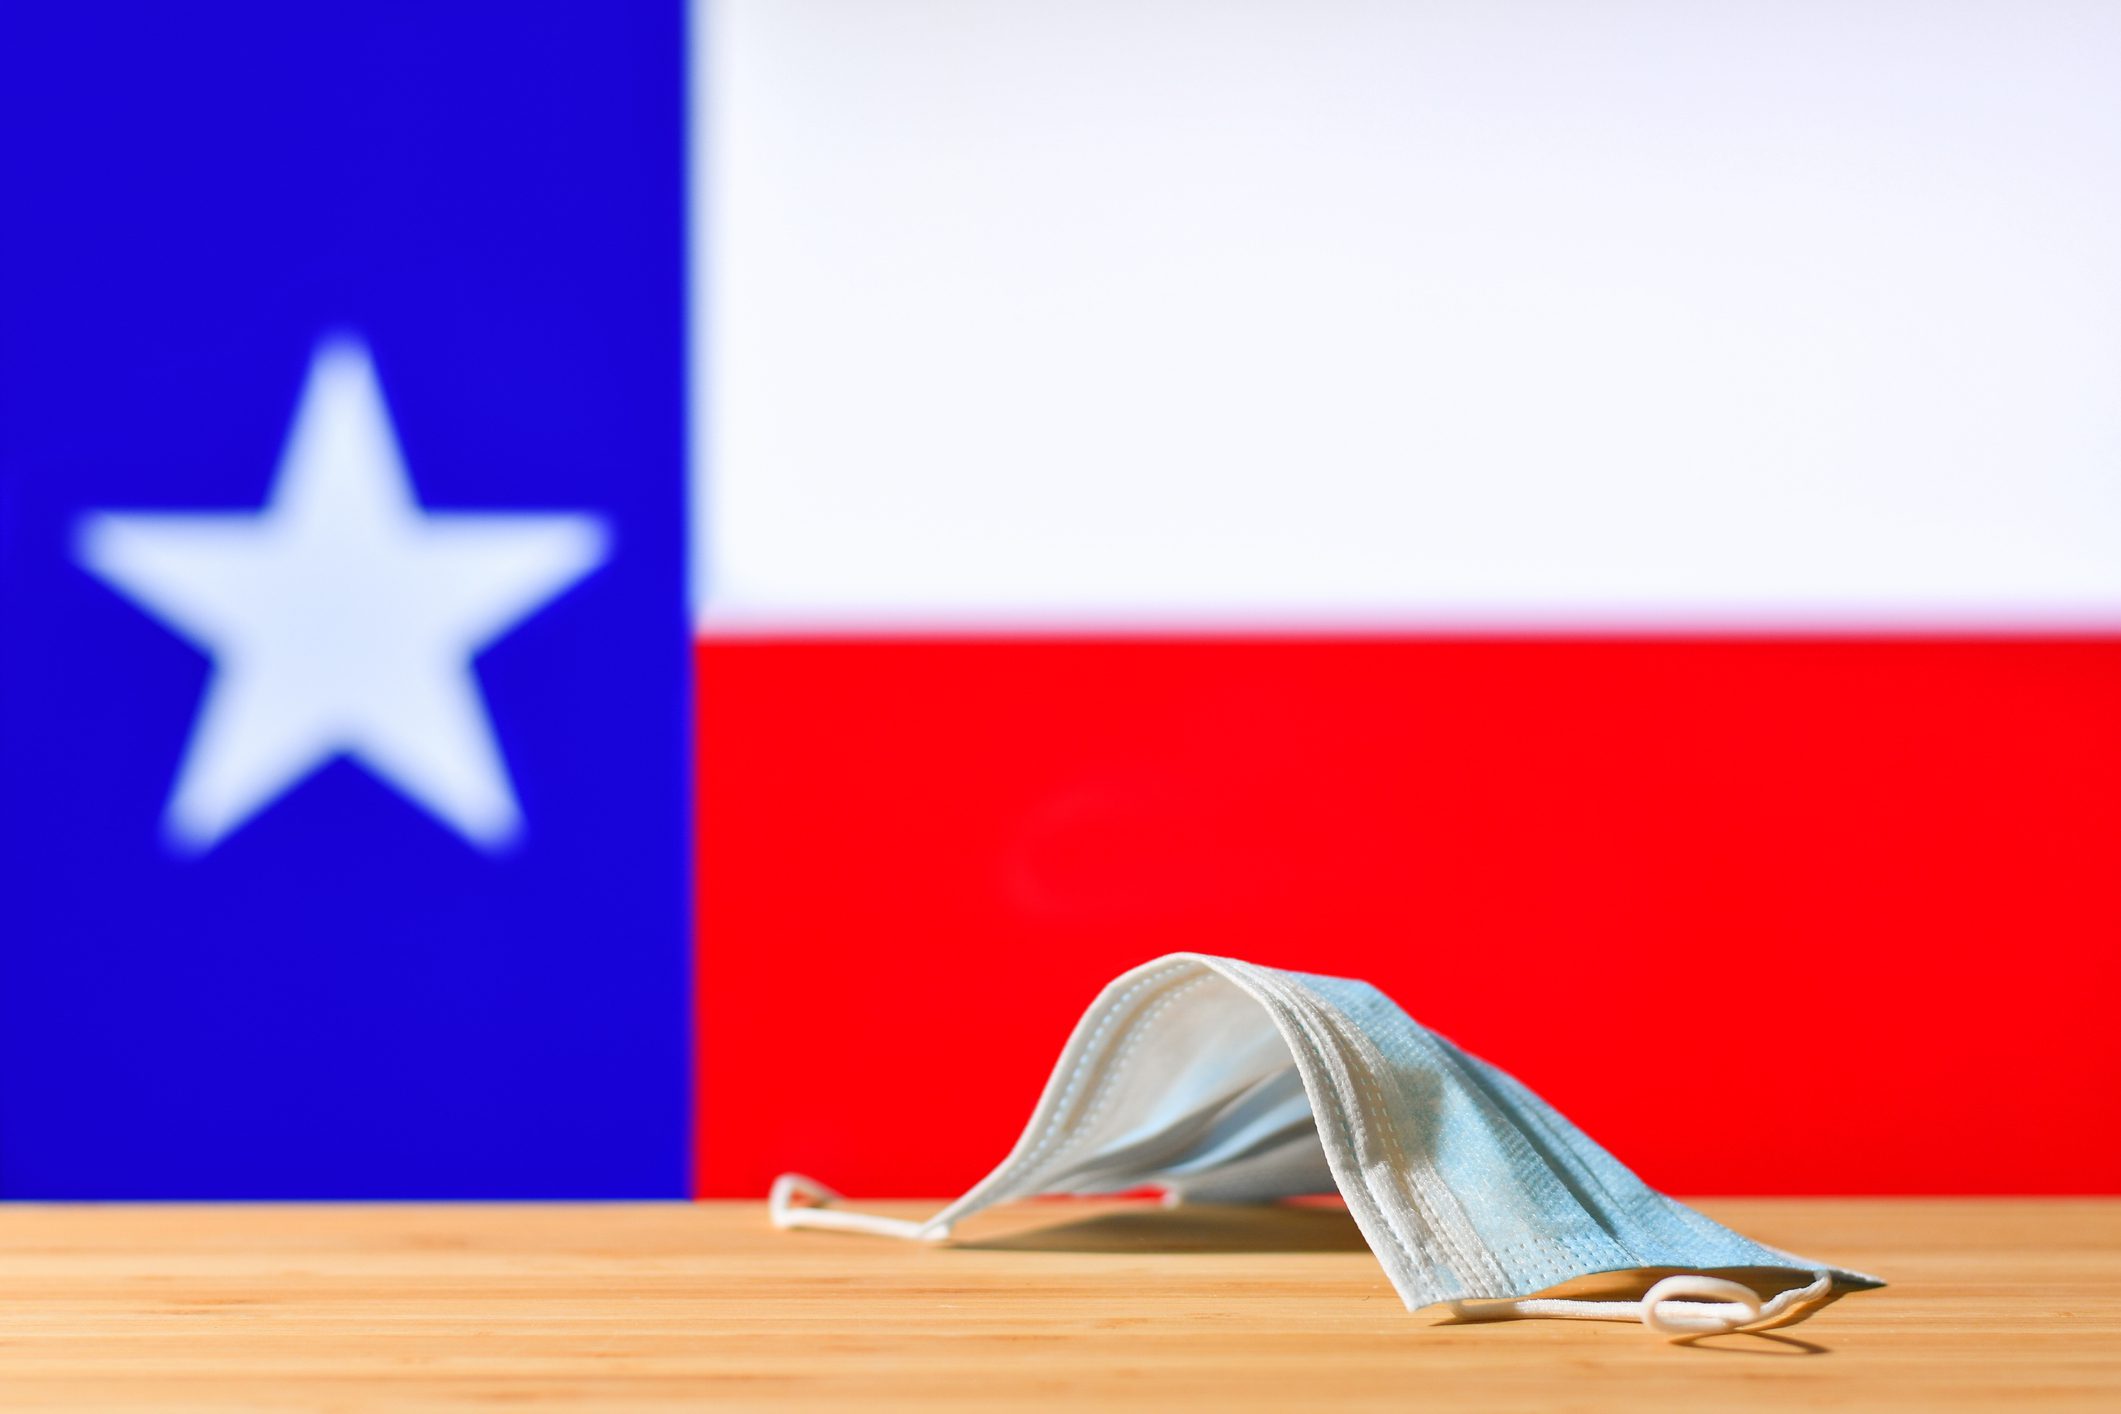 A medical mask lies on the table against the background of the flag of Texas.